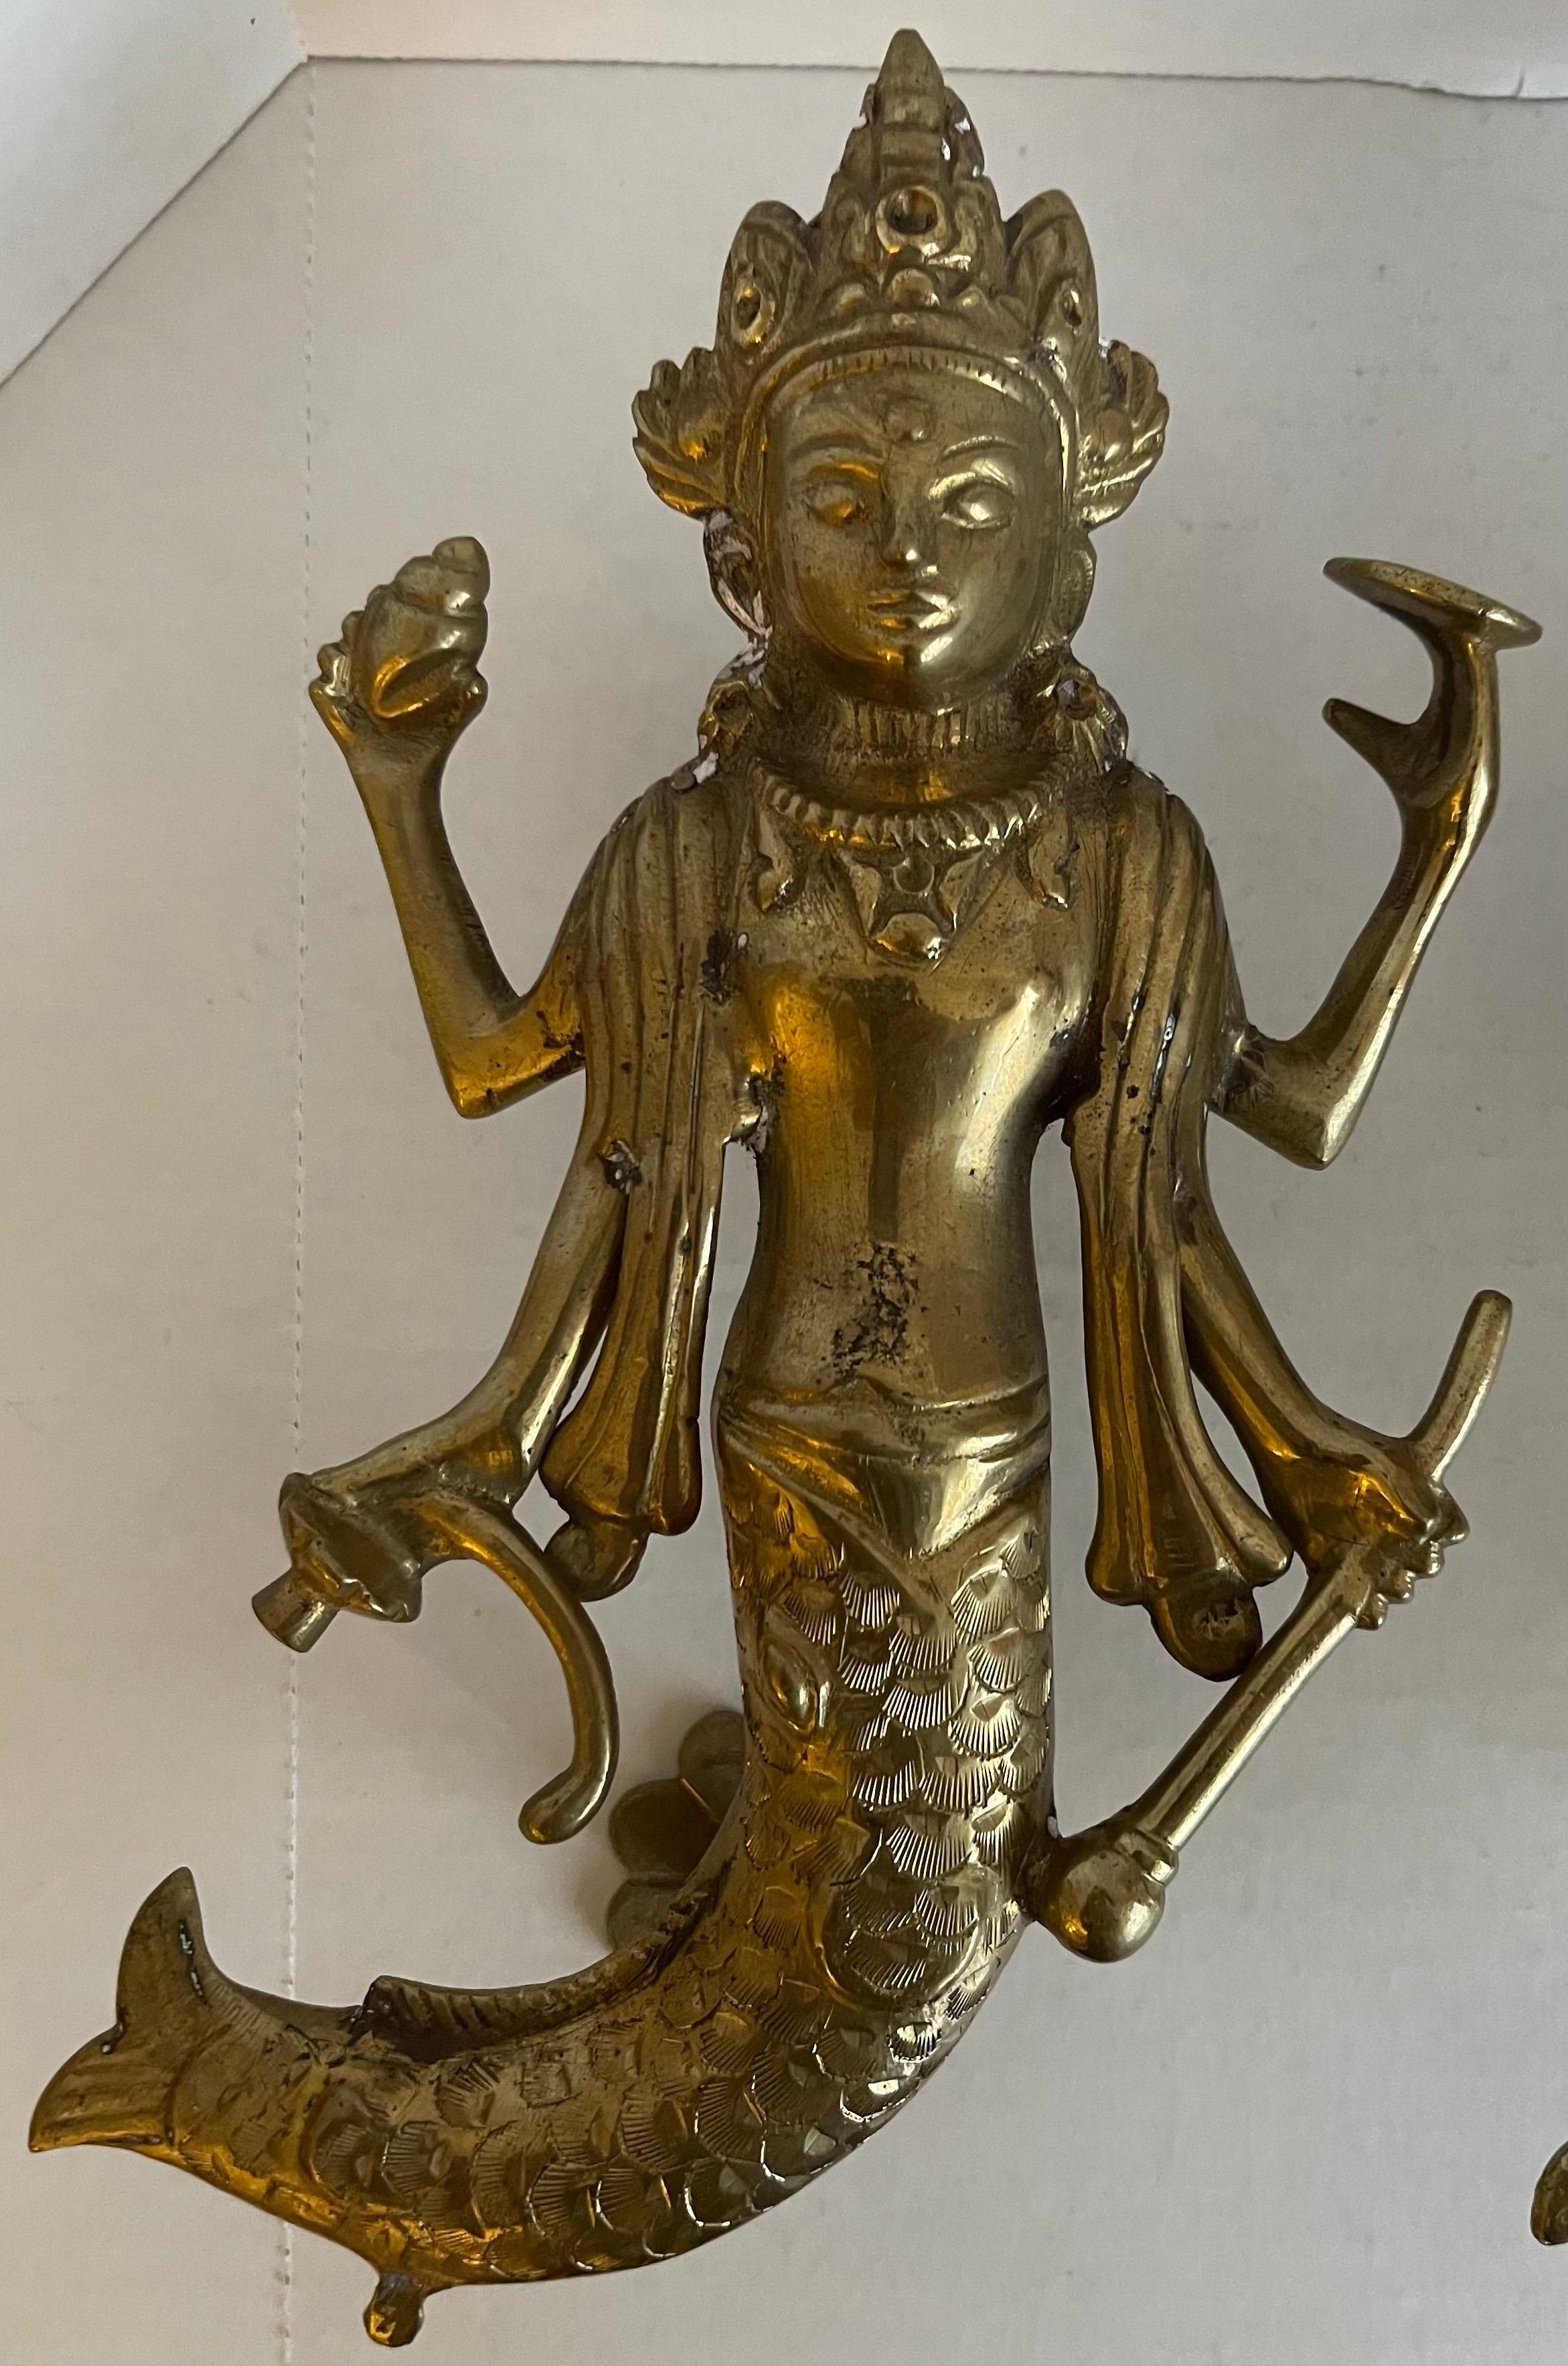 Pair of solid brass Asian goddess door knobs. No makers mark. Mounting hardware not included.